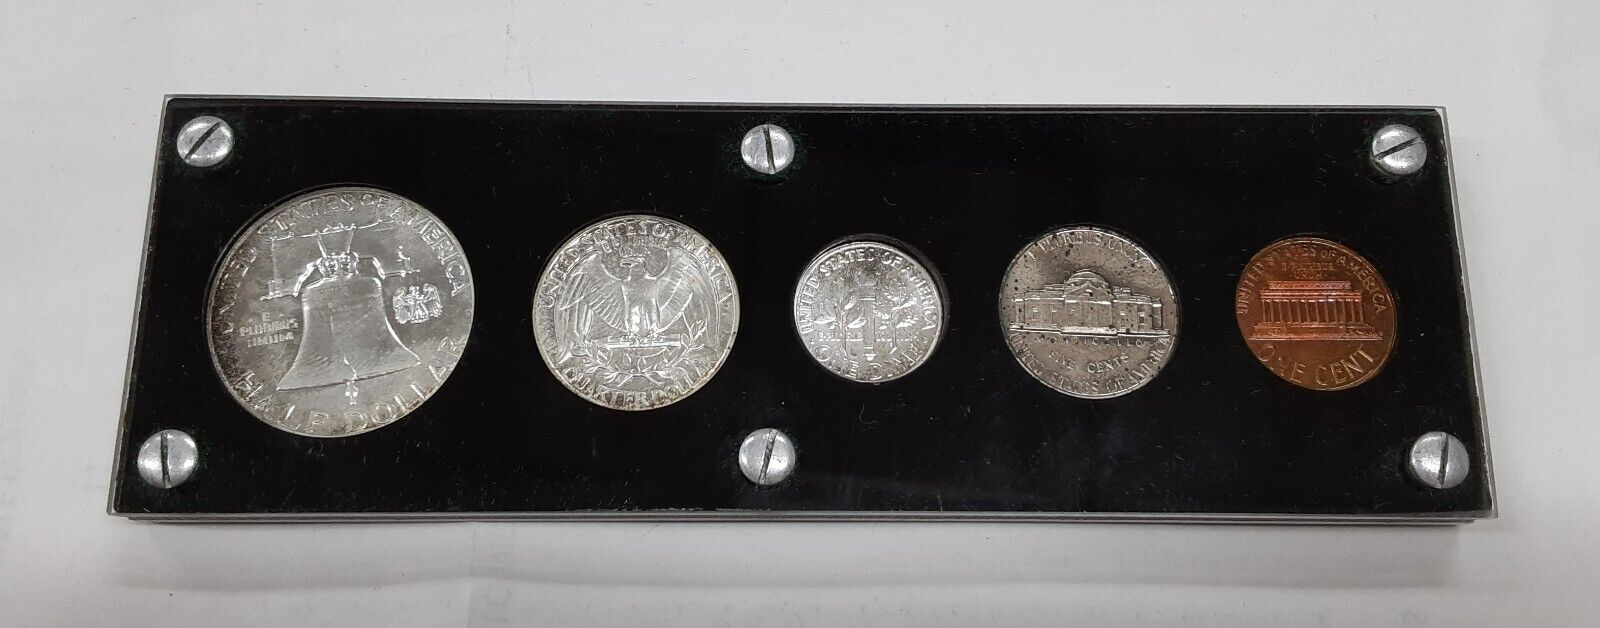 1962 US Mint Silver Proof Set 5 Gem Coins in Black Acrylic Holder (A)